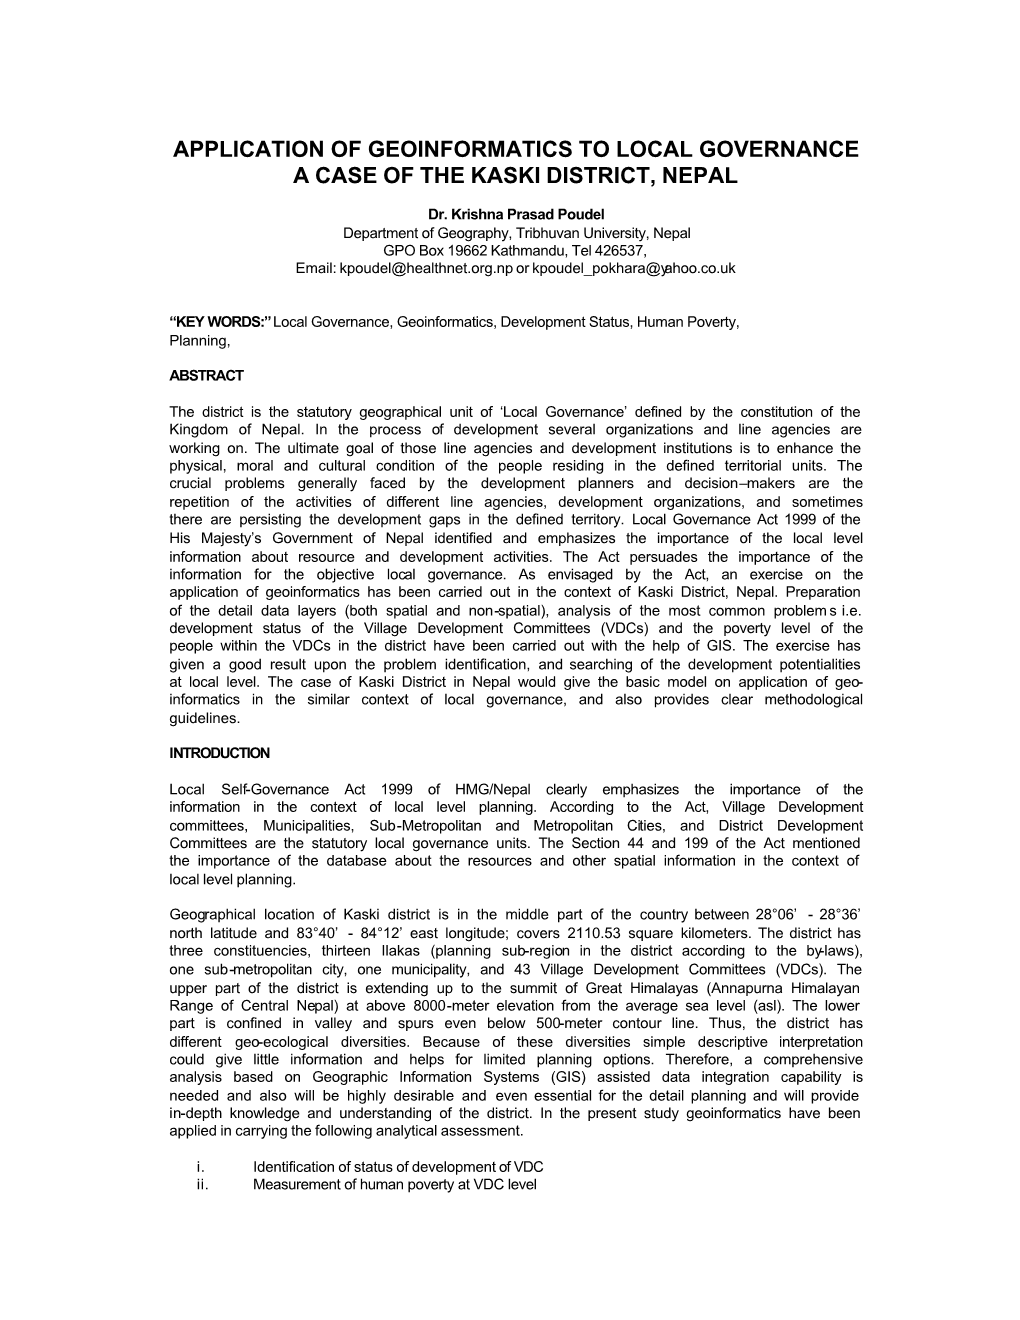 Application of Geoinformatics to Local Governance a Case of the Kaski District, Nepal